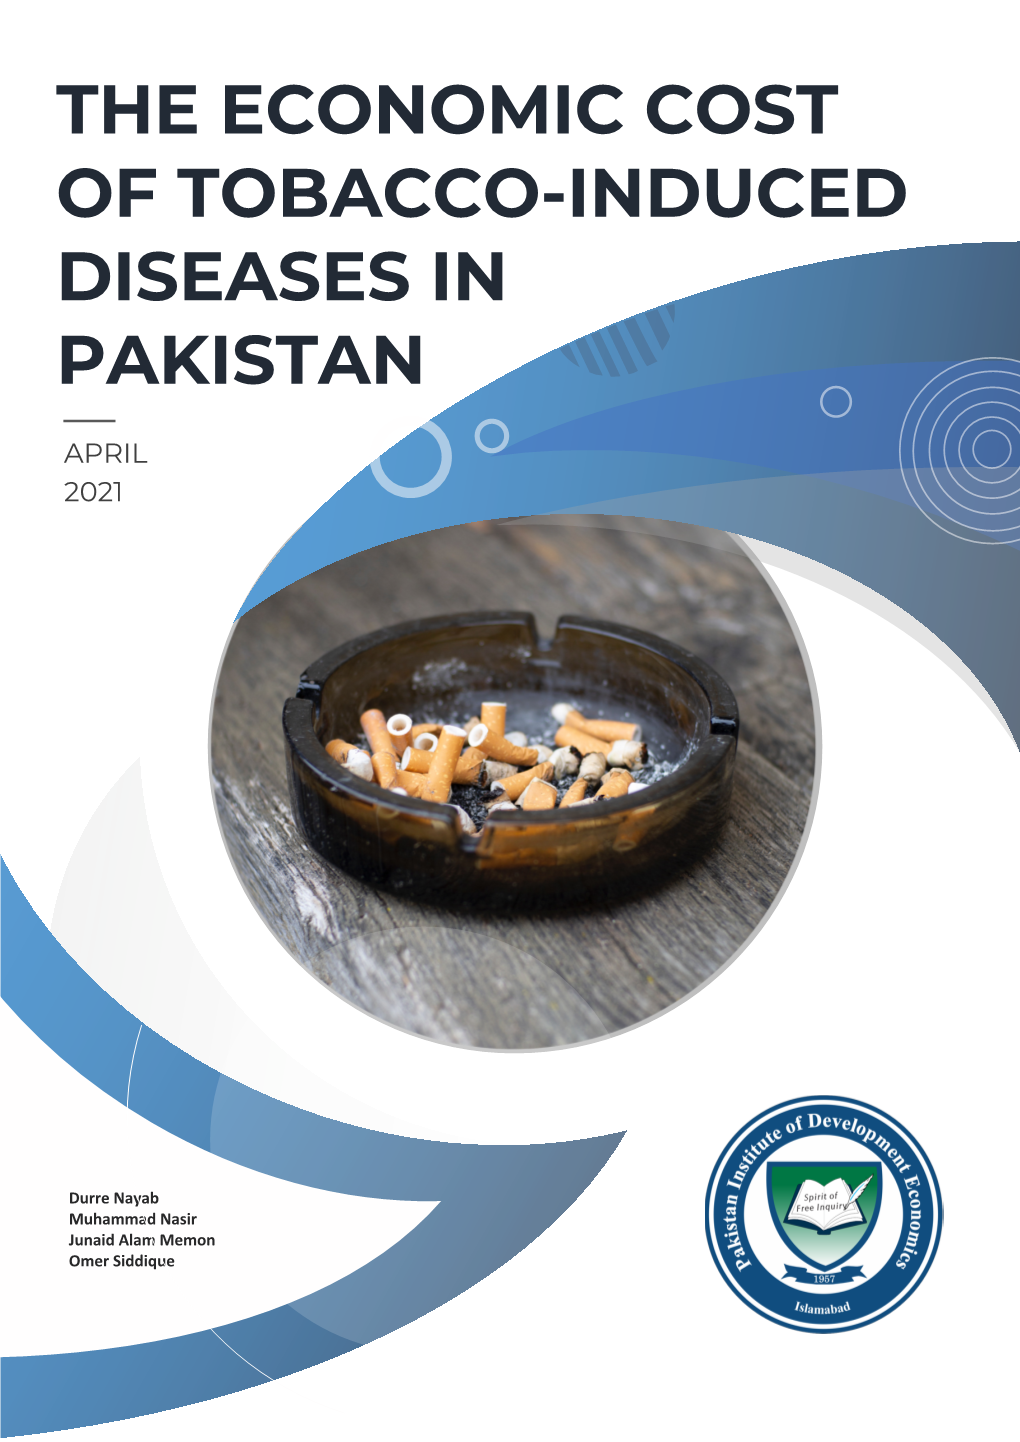 The Economic Cost of Tobacco-Induced Diseases In